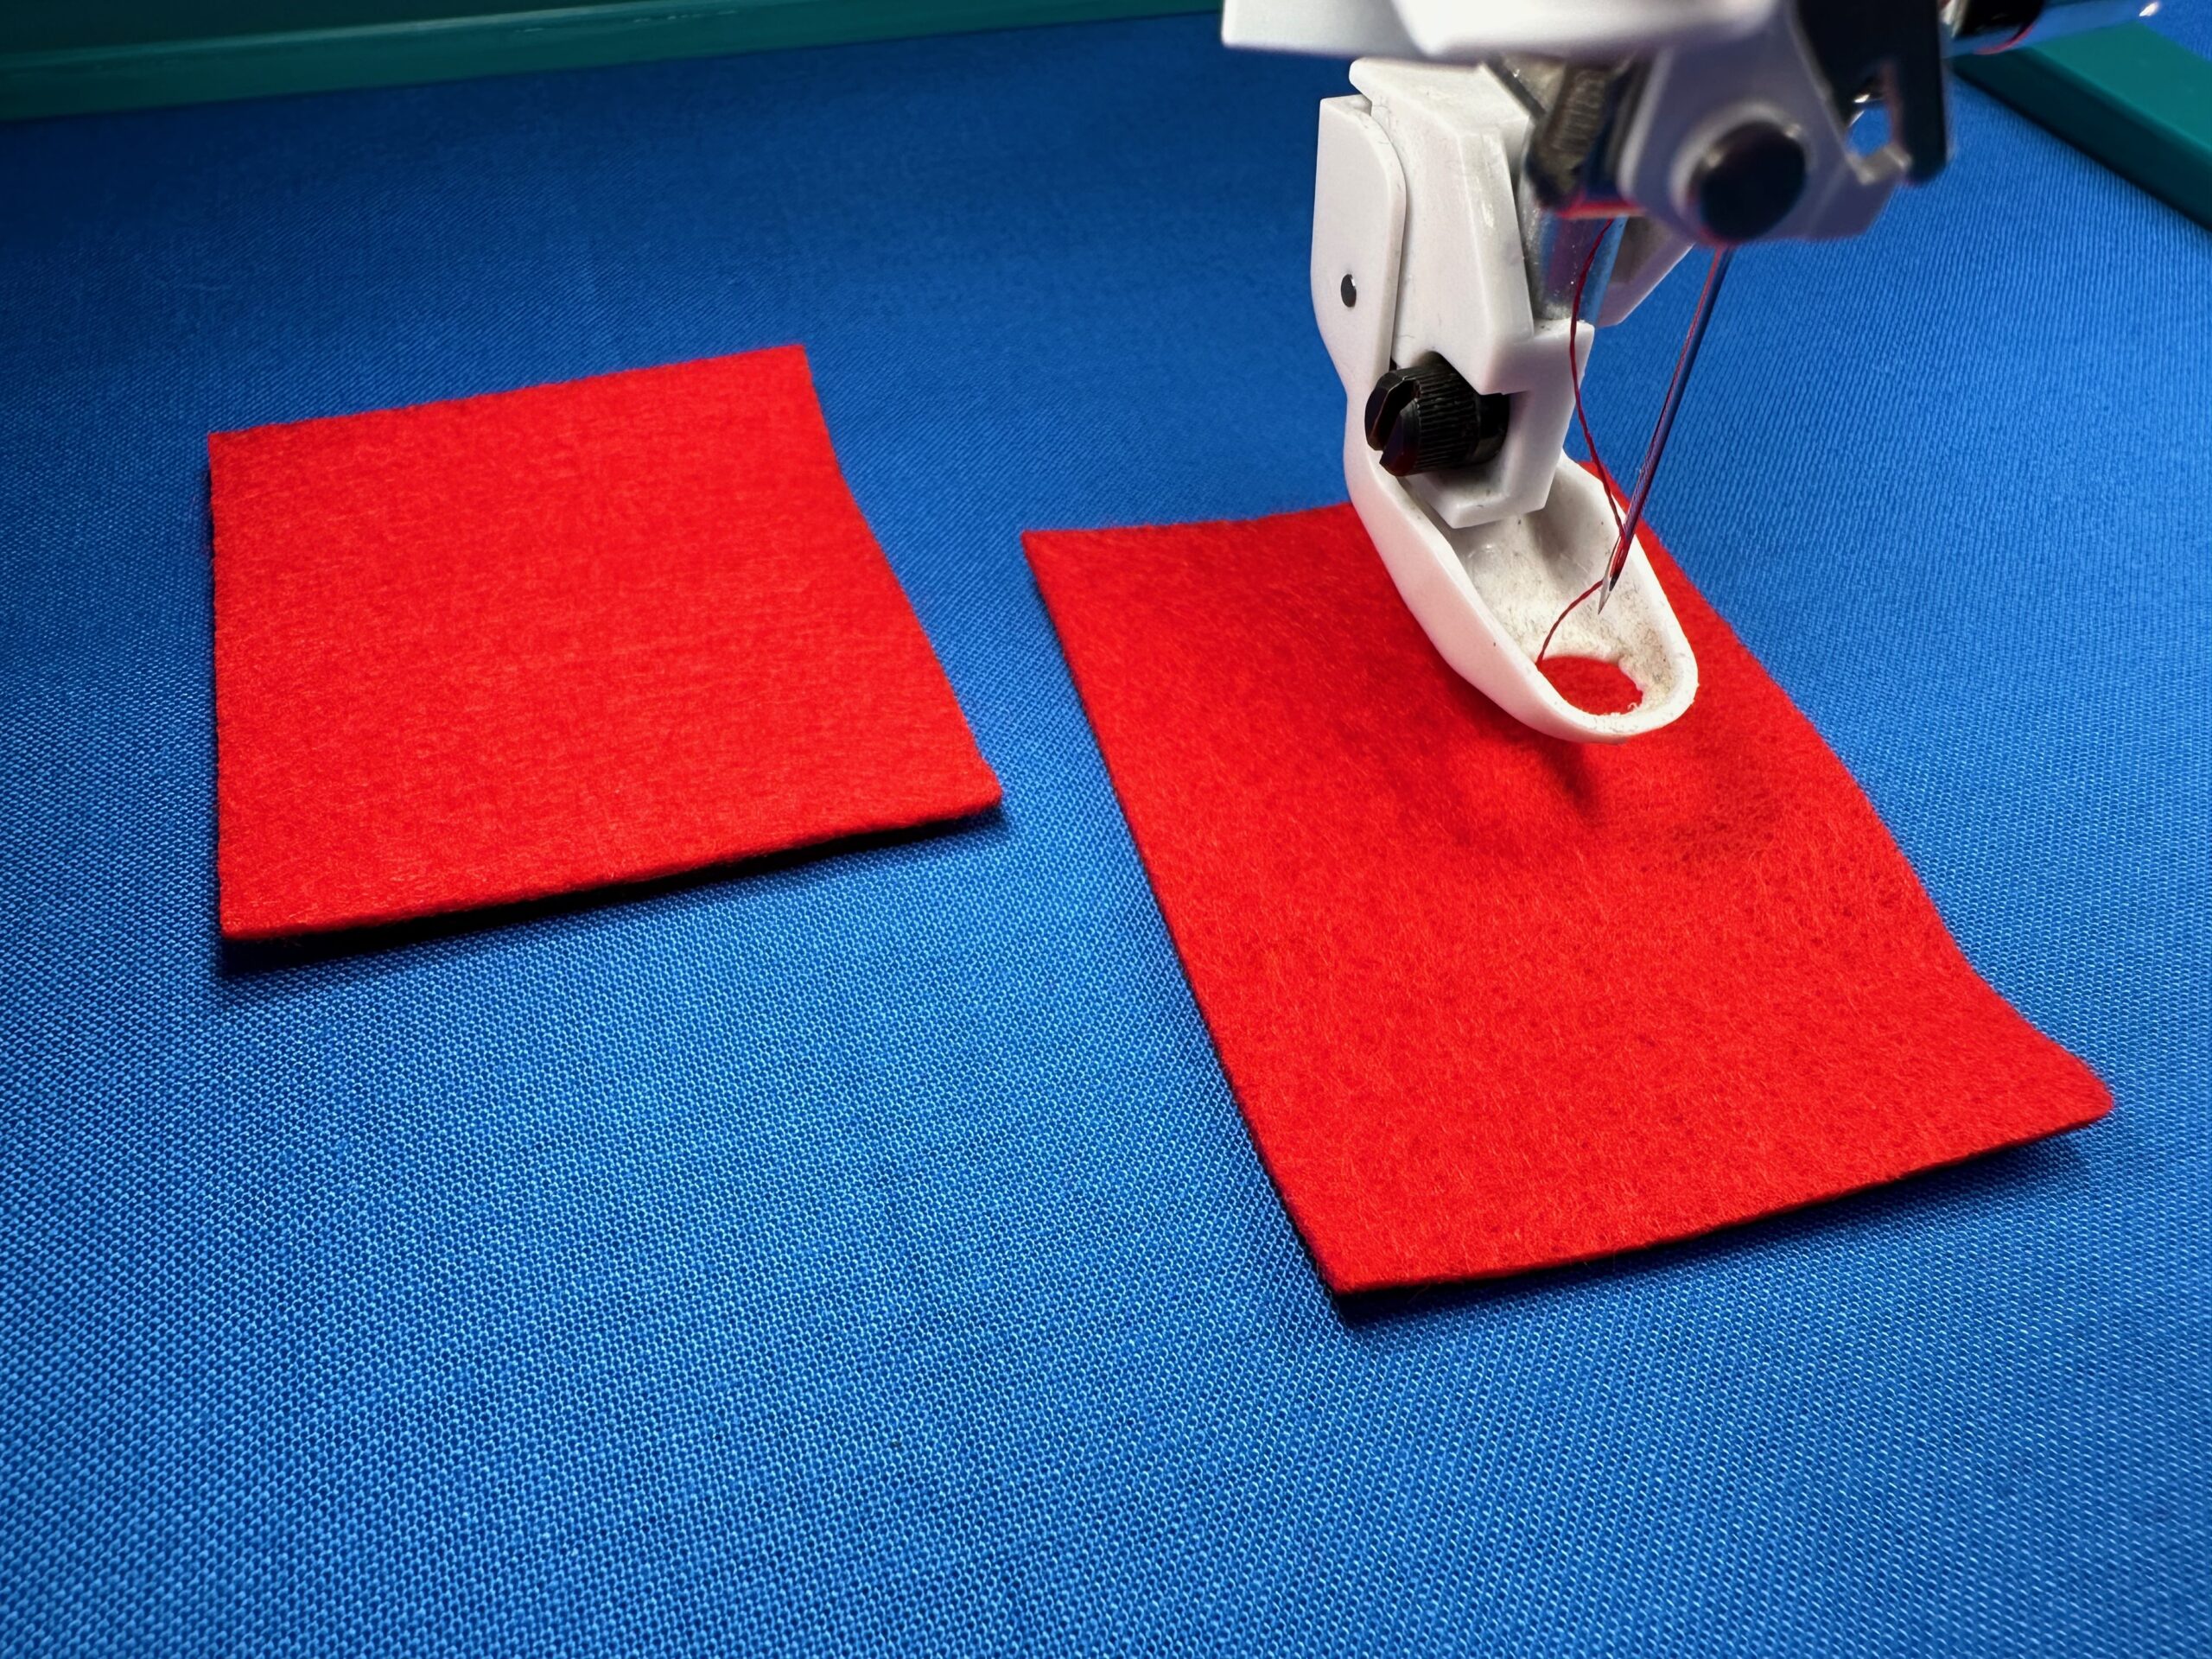 How to Make a Sewing Machine Mat